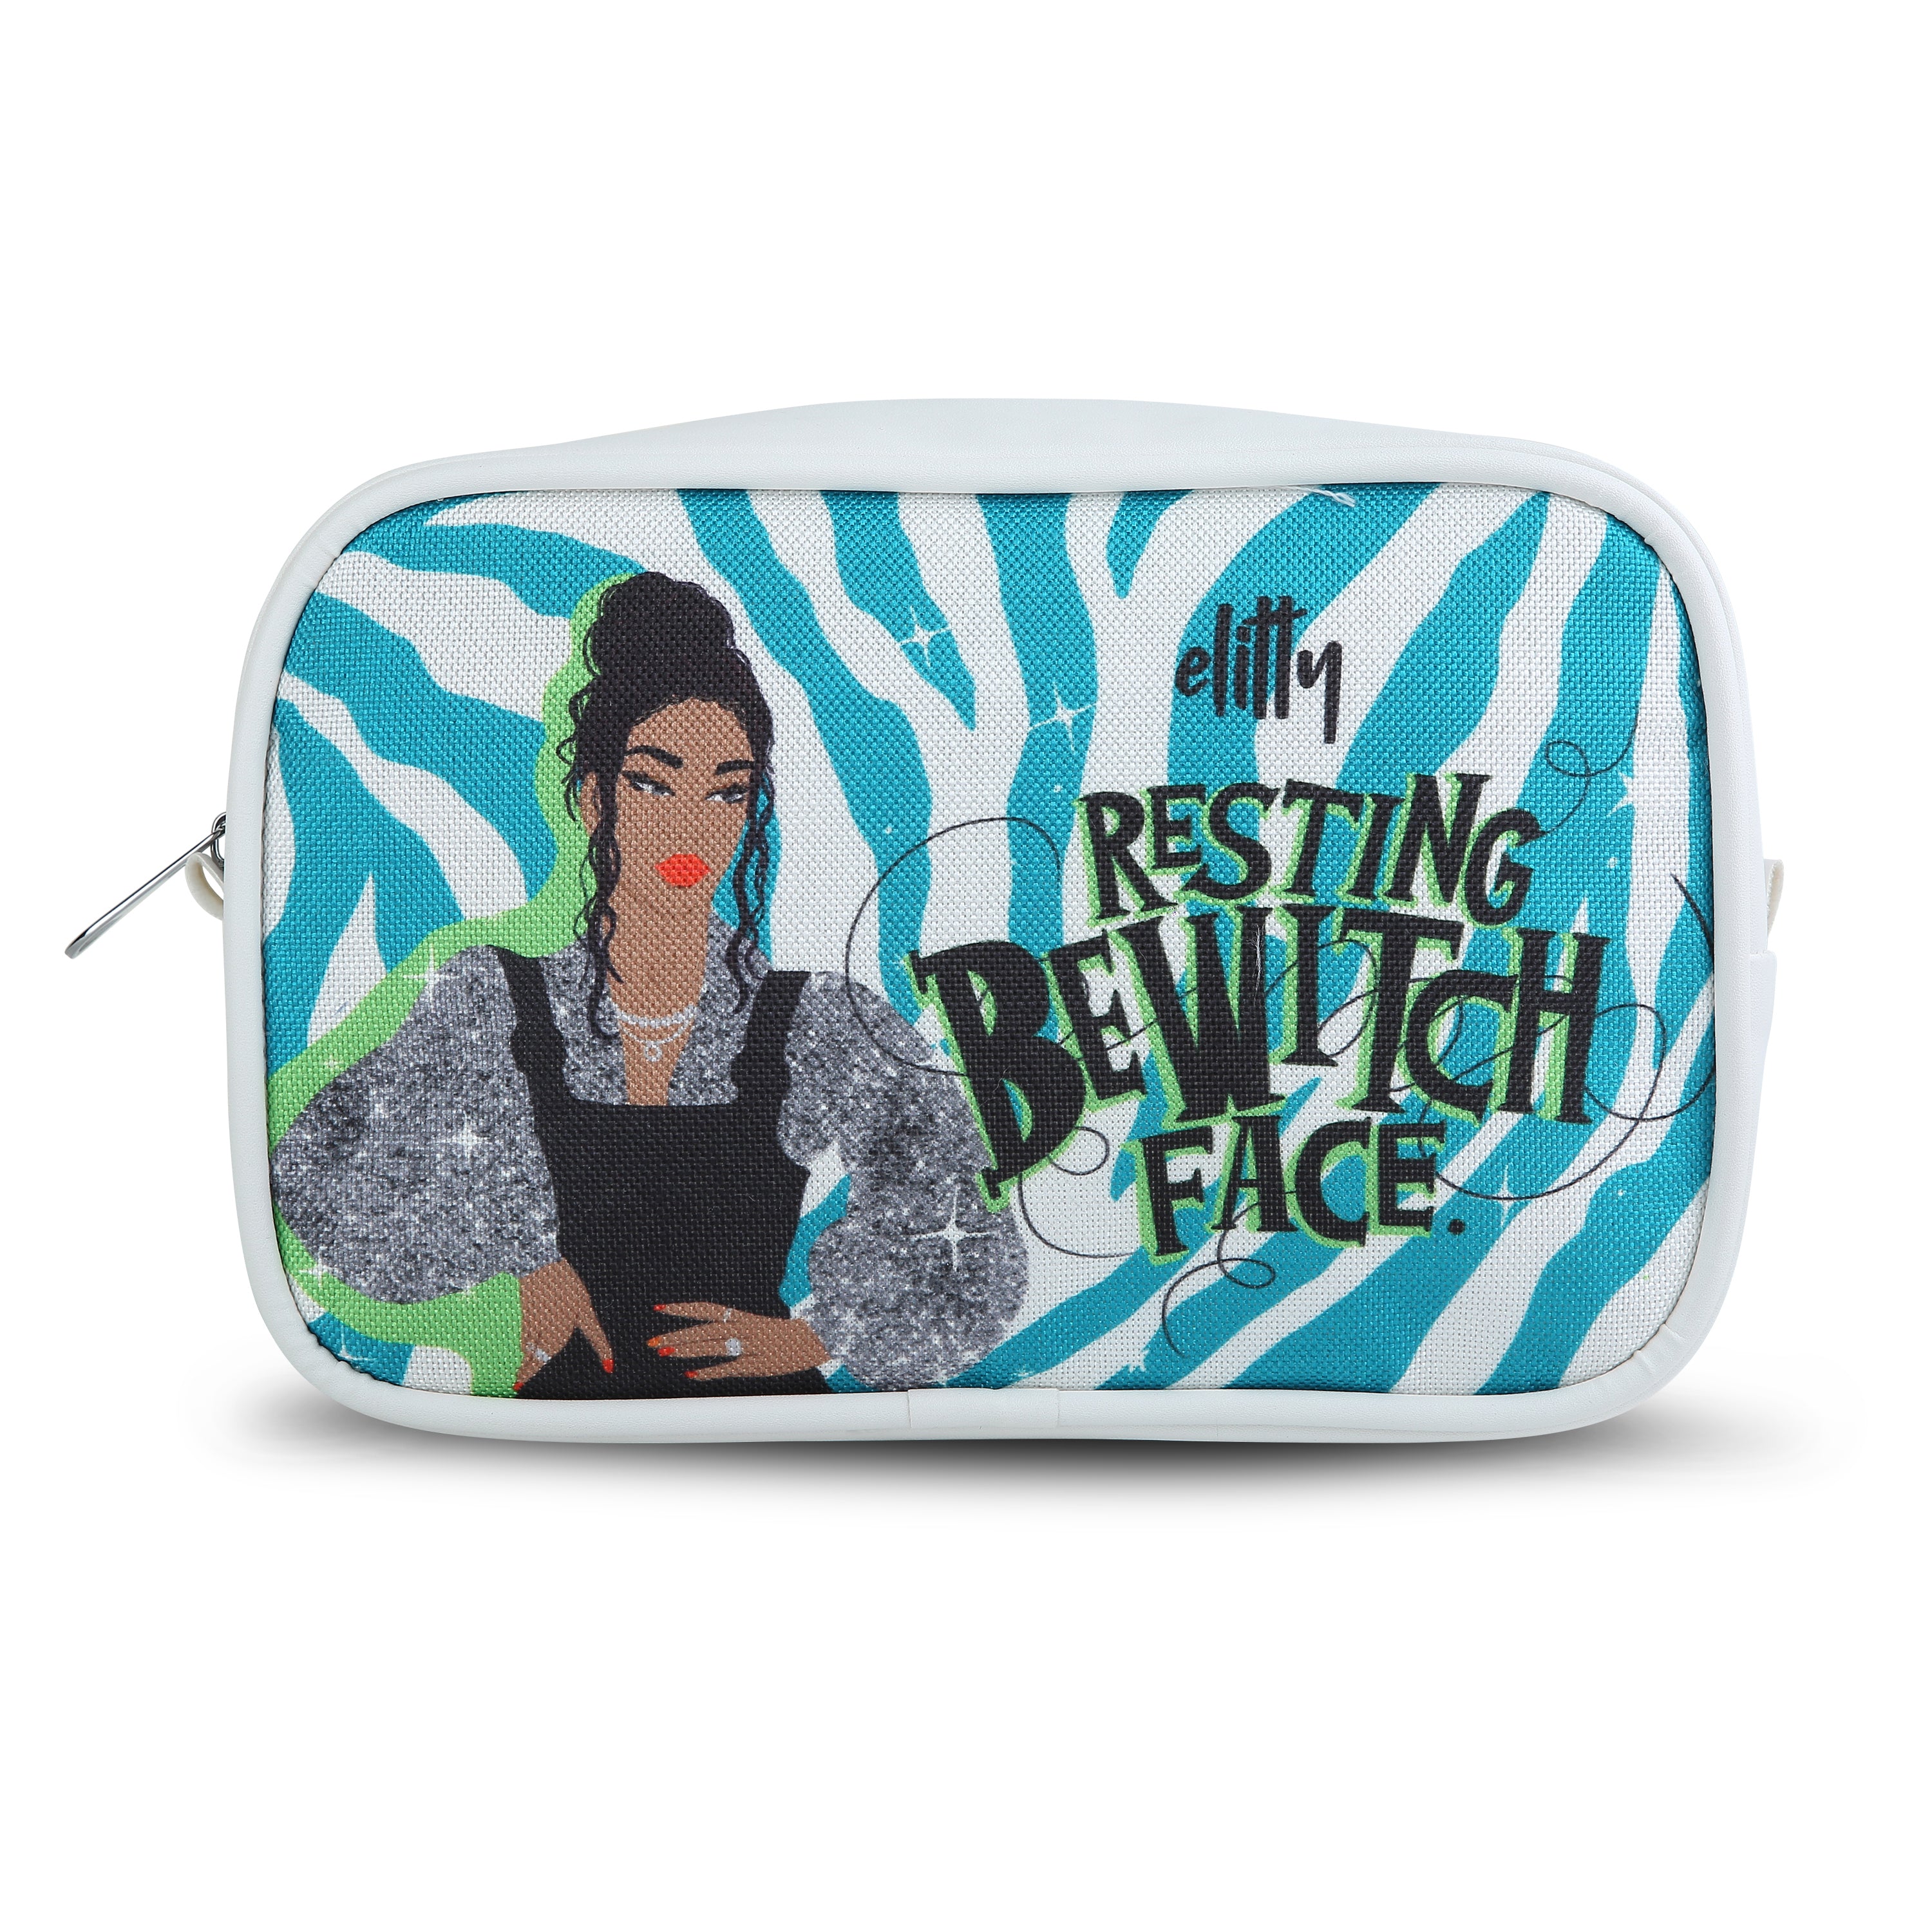 Elitty Bewitchy Travel  Makeup Pouch